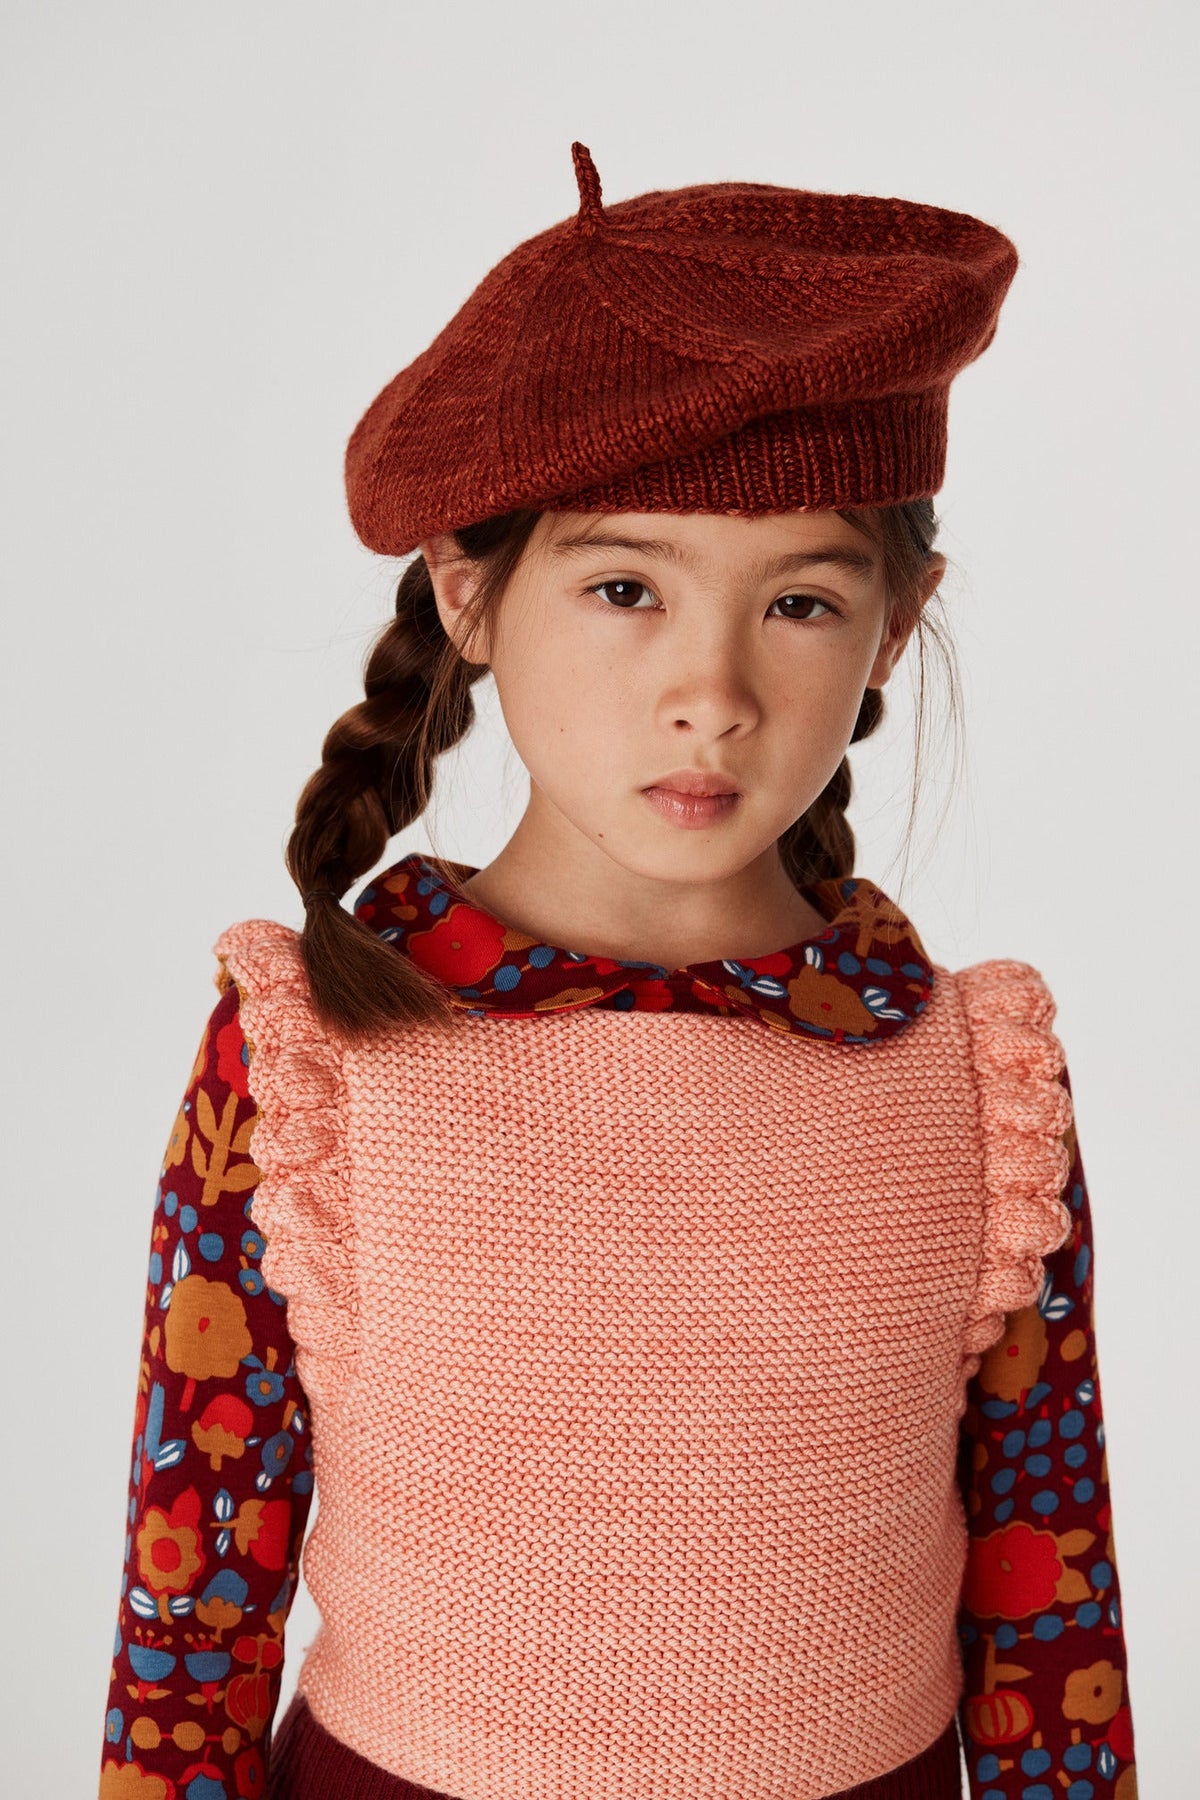 Simple Beret - Henna+Model is 48 inches tall, 47lbs, wearing a size 4-6y